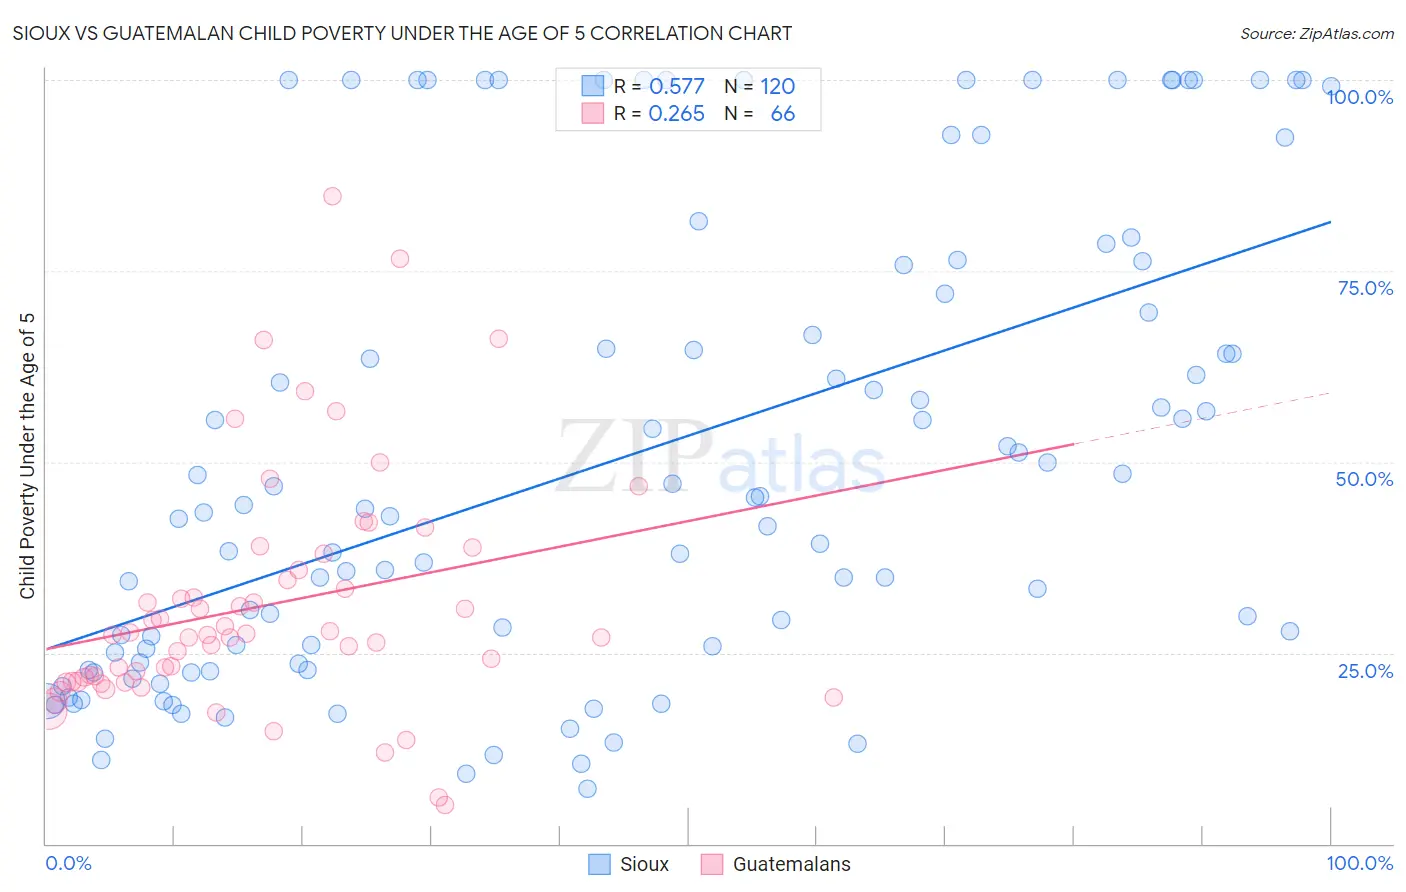 Sioux vs Guatemalan Child Poverty Under the Age of 5